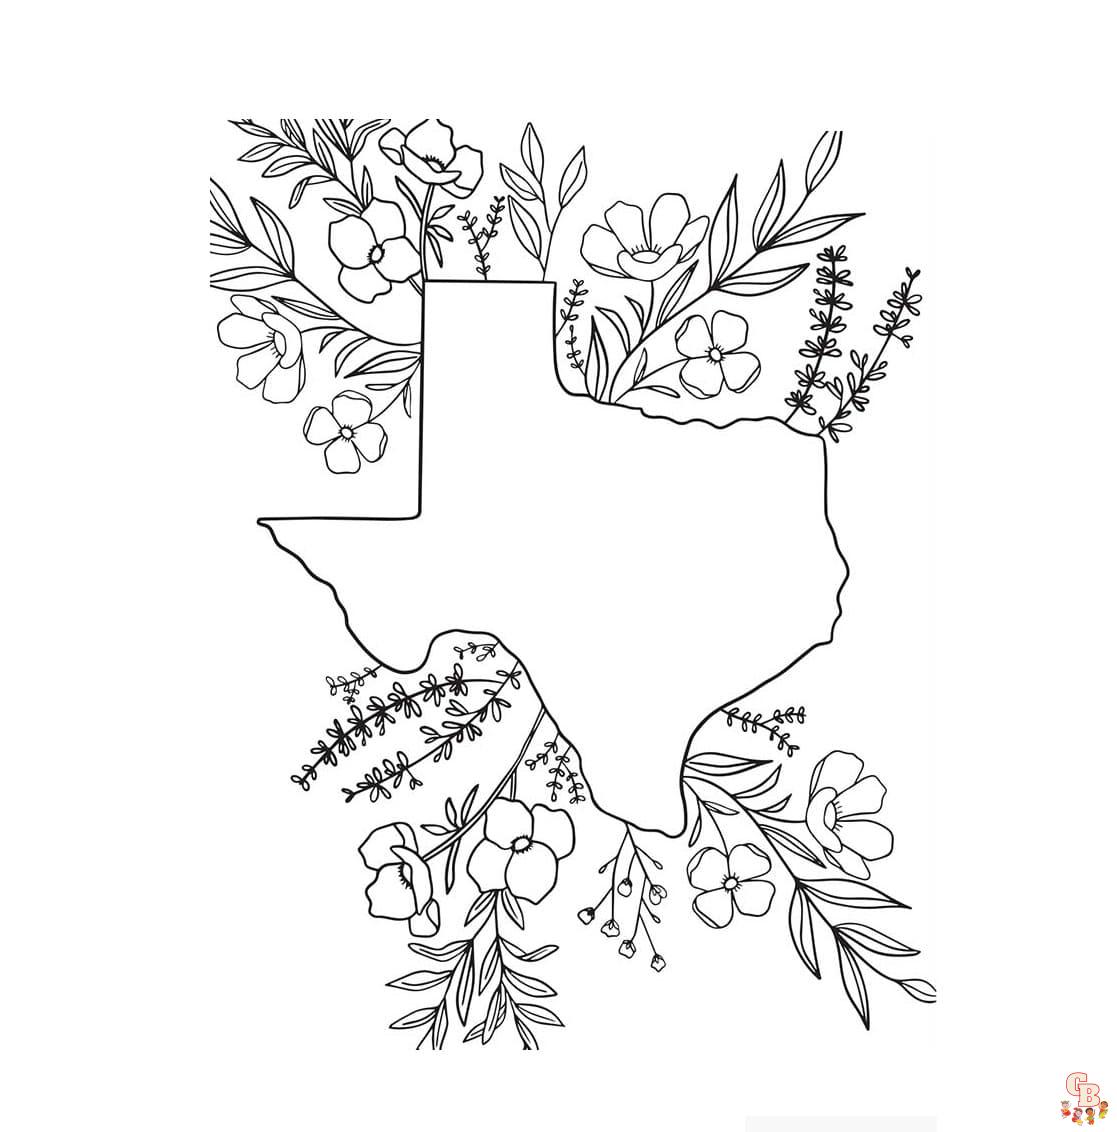 Free Texas coloring pages for kids